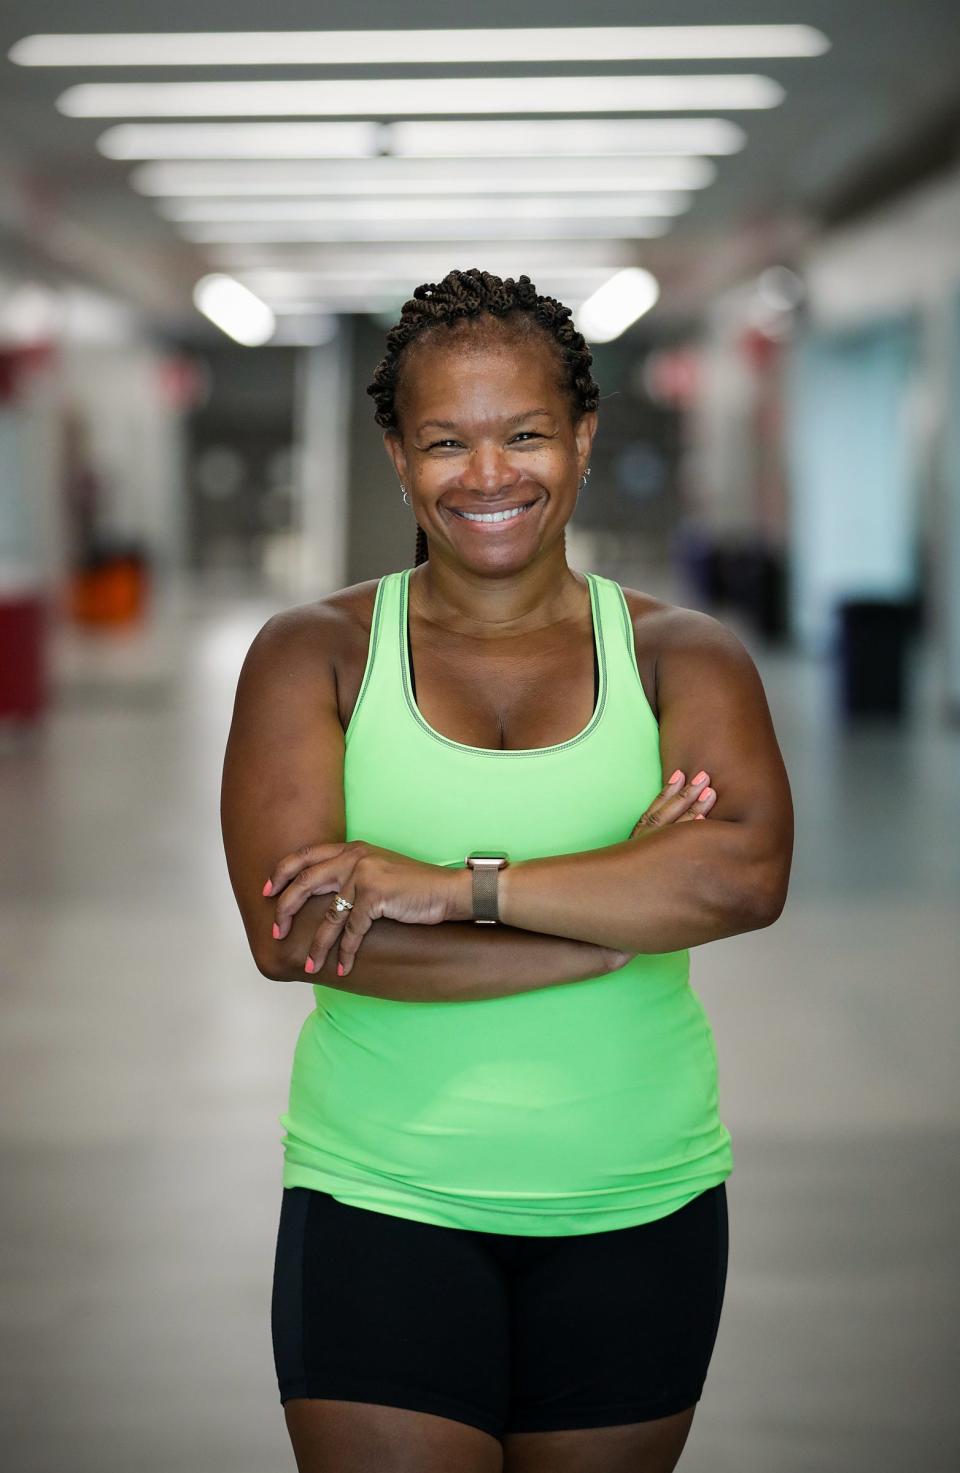 "COVID's negative health outcomes come from diseases that are positively impacted by physical activity," says NiCole Keith, president of the American College of Sports Medicine, who exercises at Indiana University's Natatorium in Indianapolis.